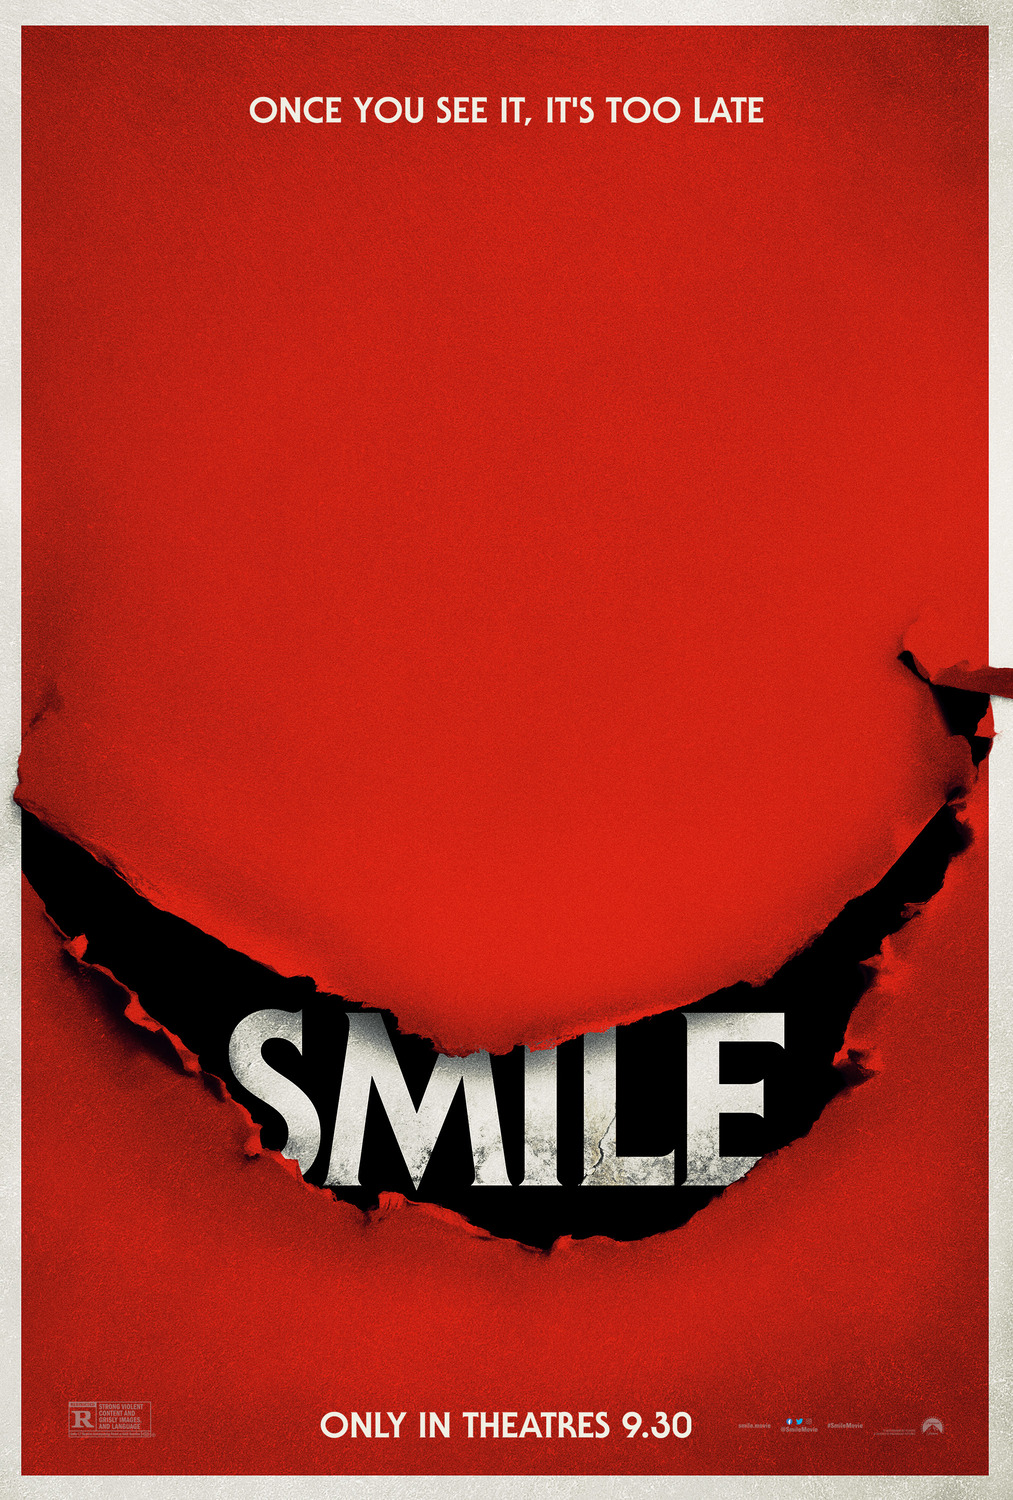 Smile tops the weekend box office again - Smile poster